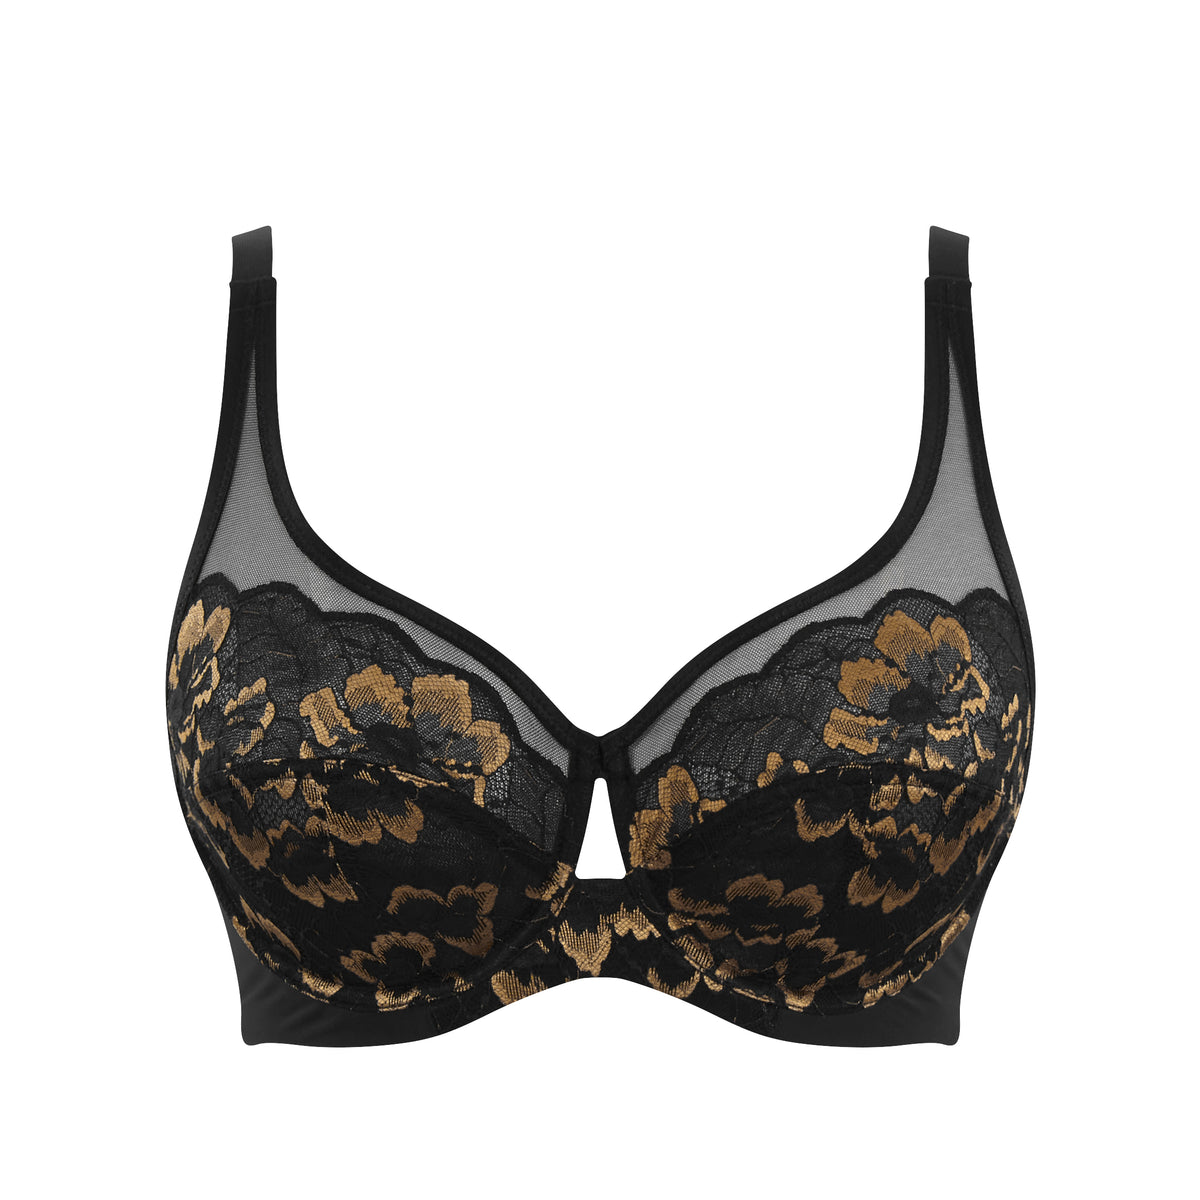 It's time to introduce Panache Lingerie's newest style - Radiance